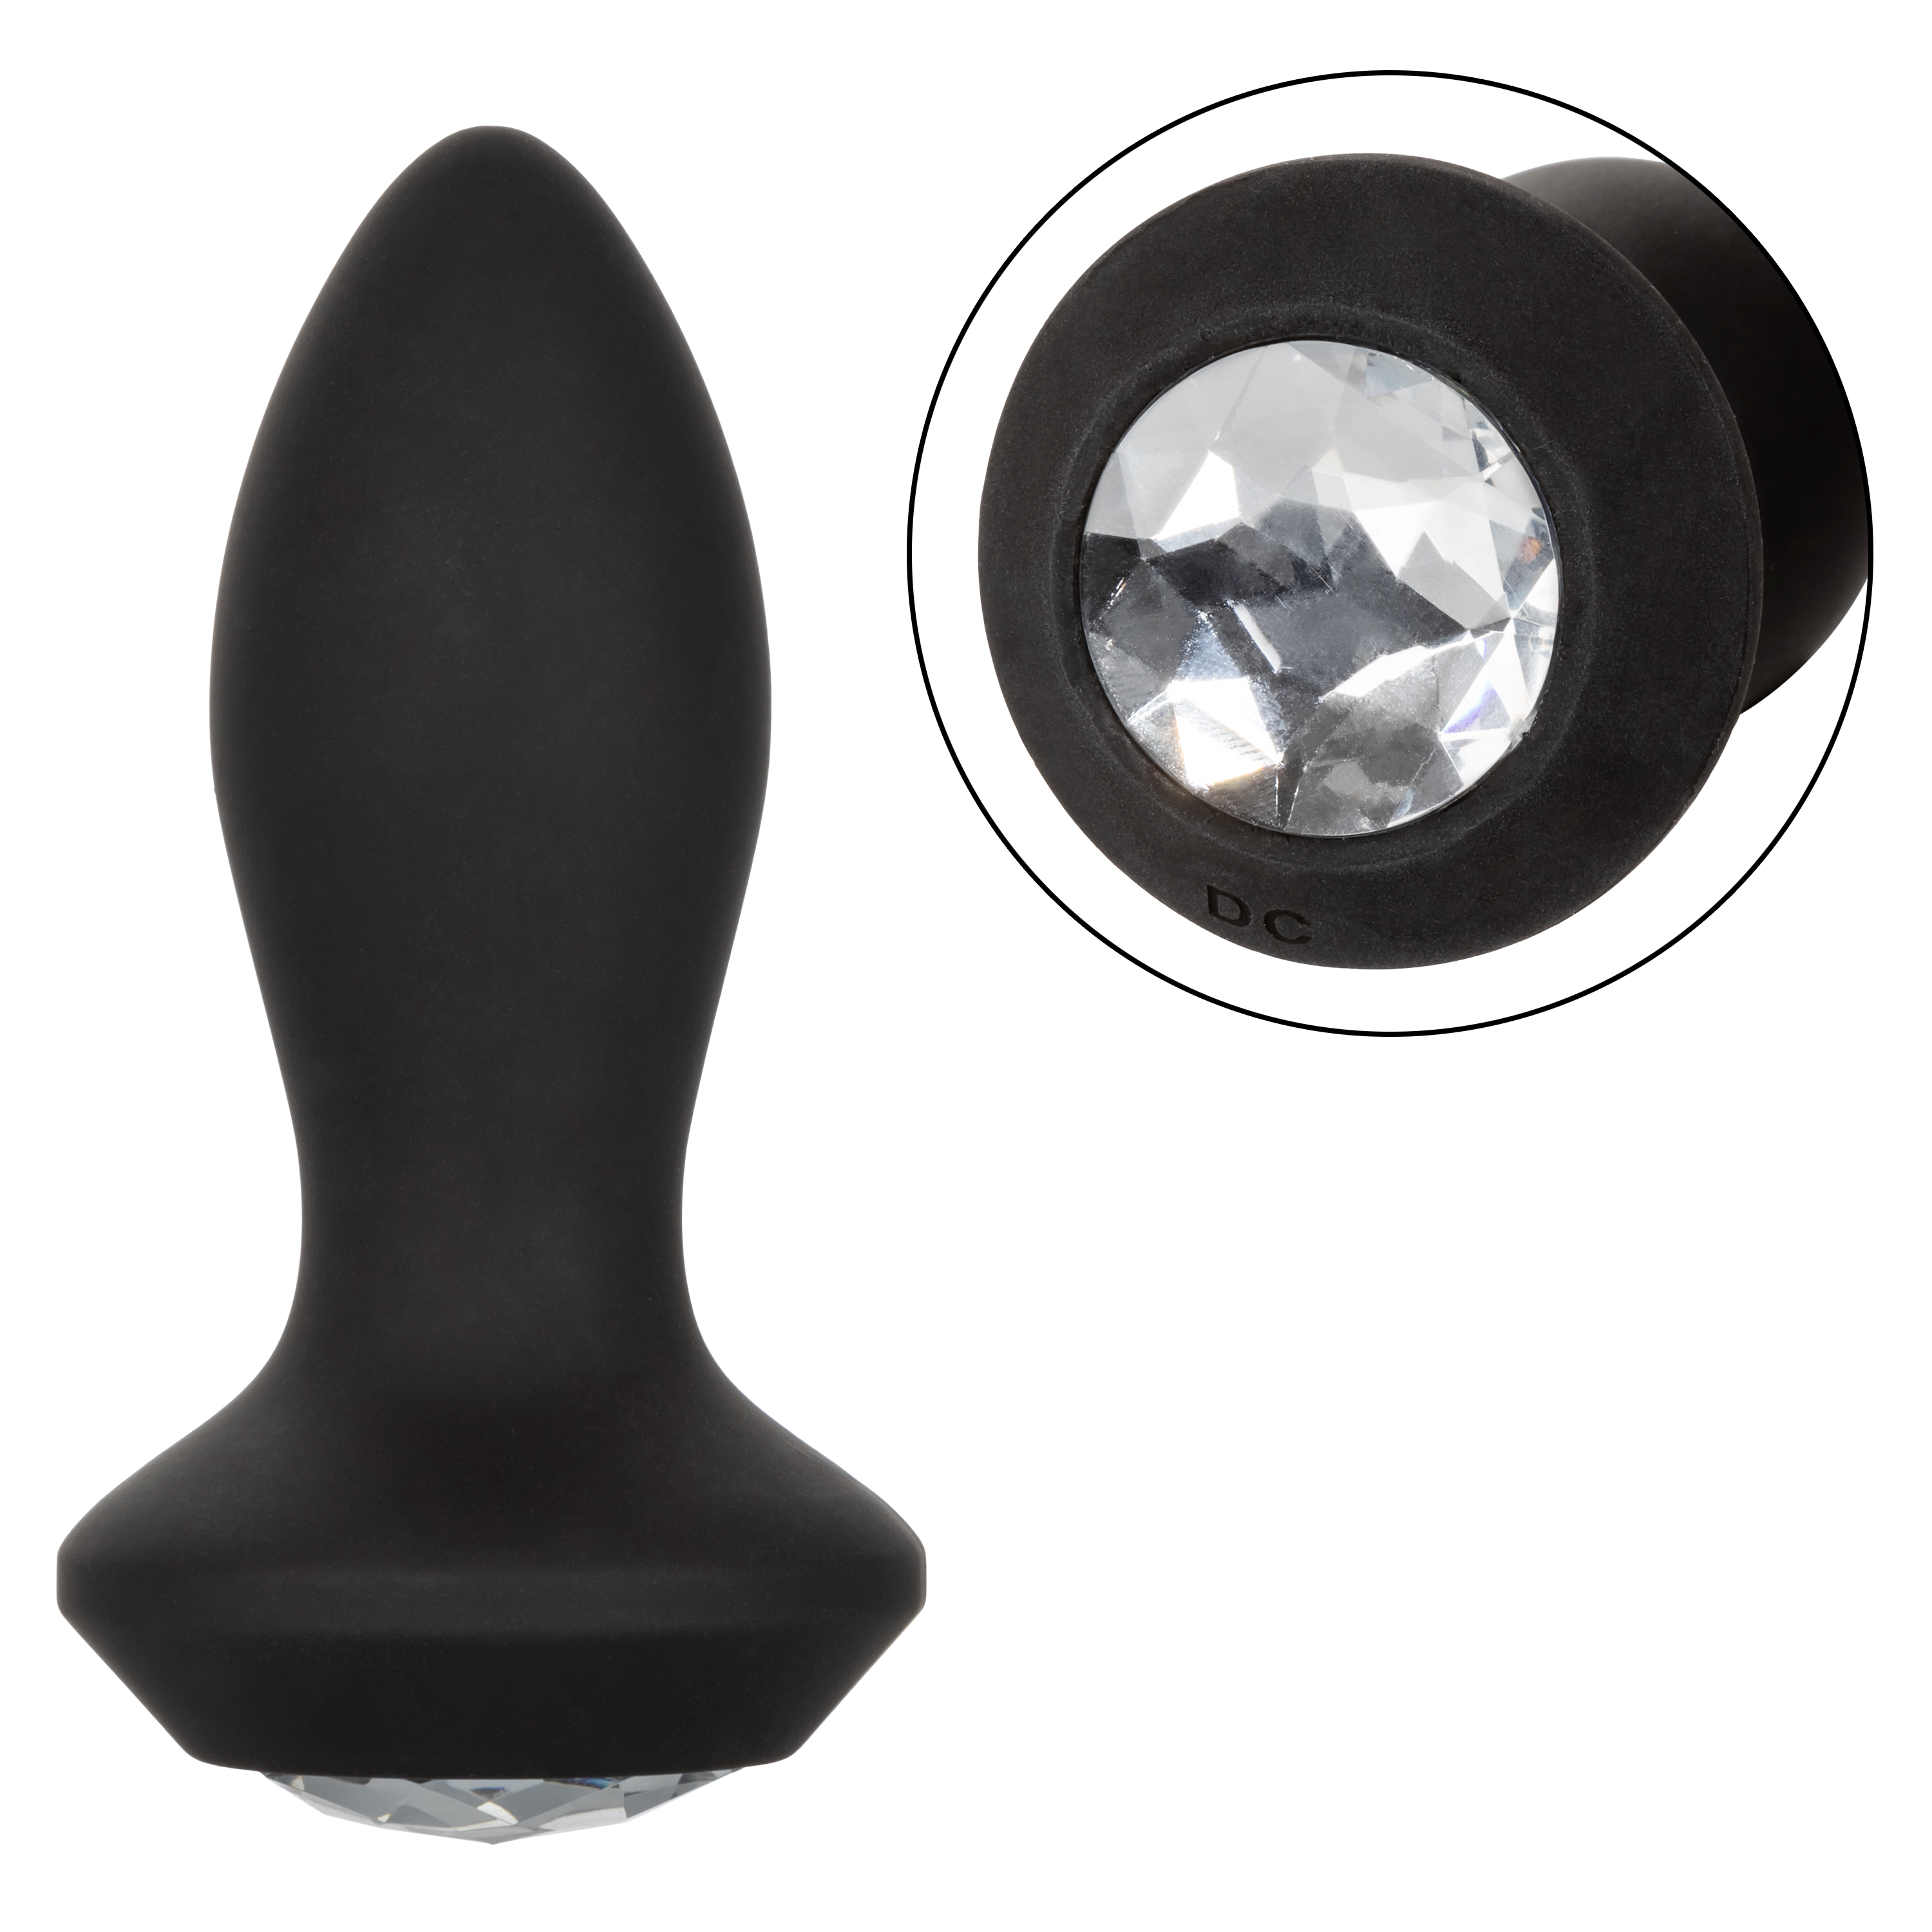 Power+Gem+Vibrating+Petite+Crystal+Probe+Silicone+Waterproof+USB+Rechargeable+Anal+Vibe